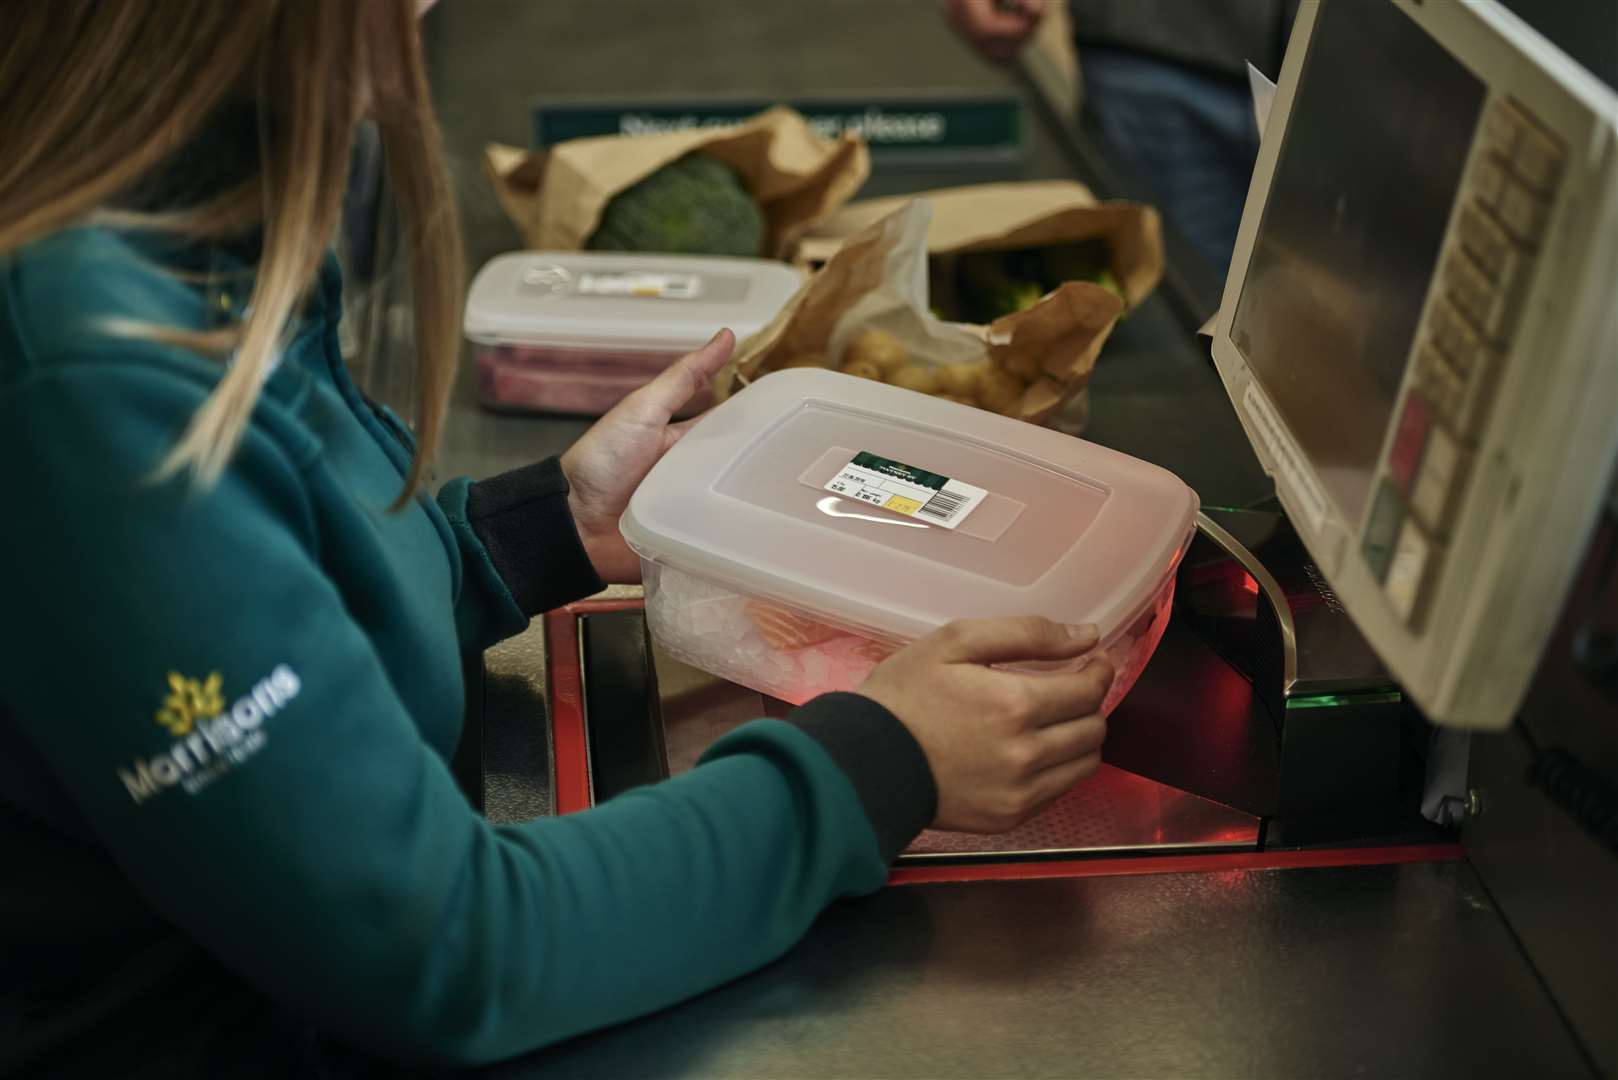 Morrisons customers who use its deli counters are asked to bring their own reusable containers